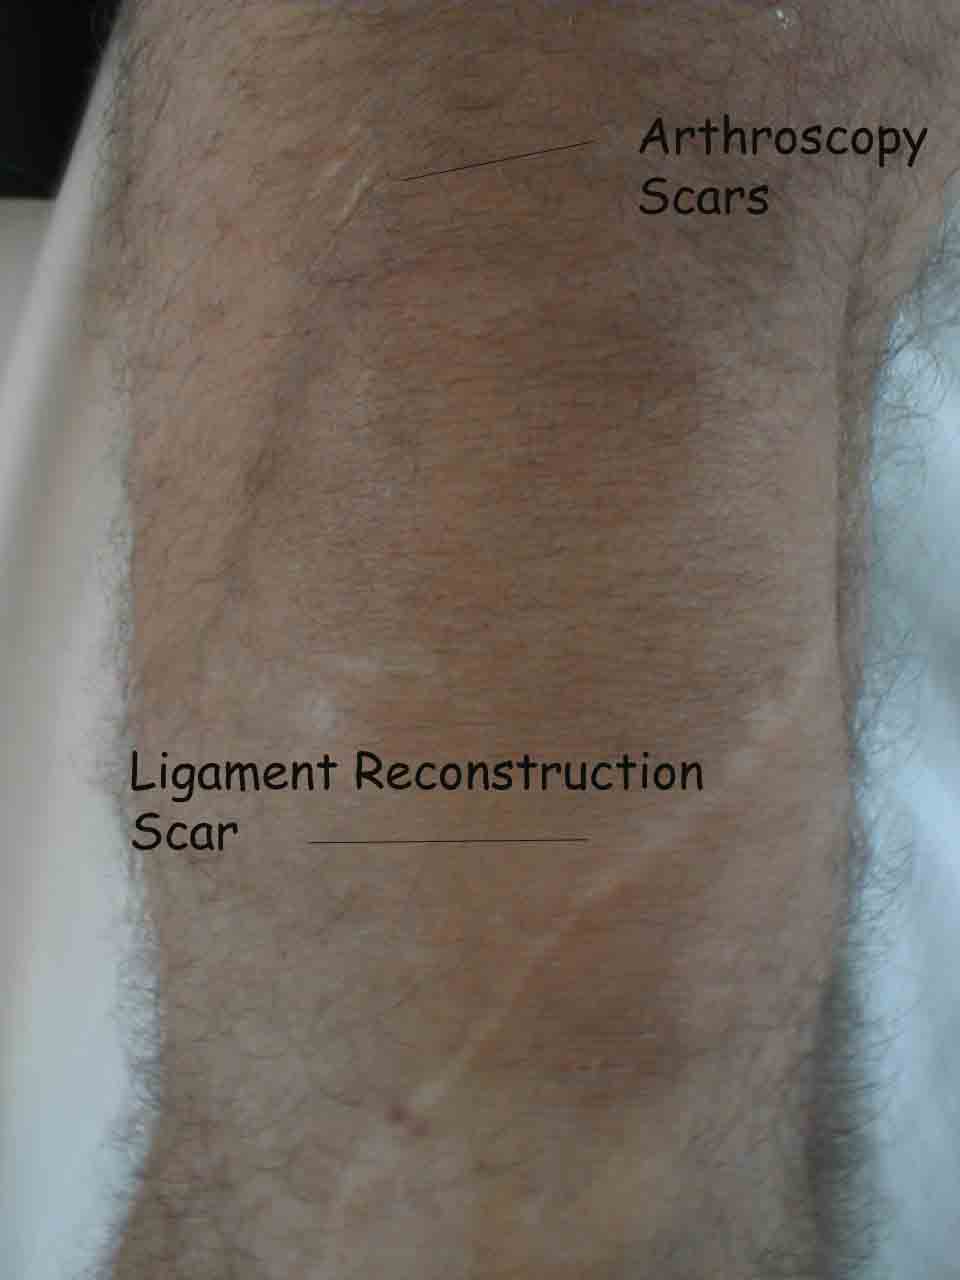 Ligament reconstruction scars